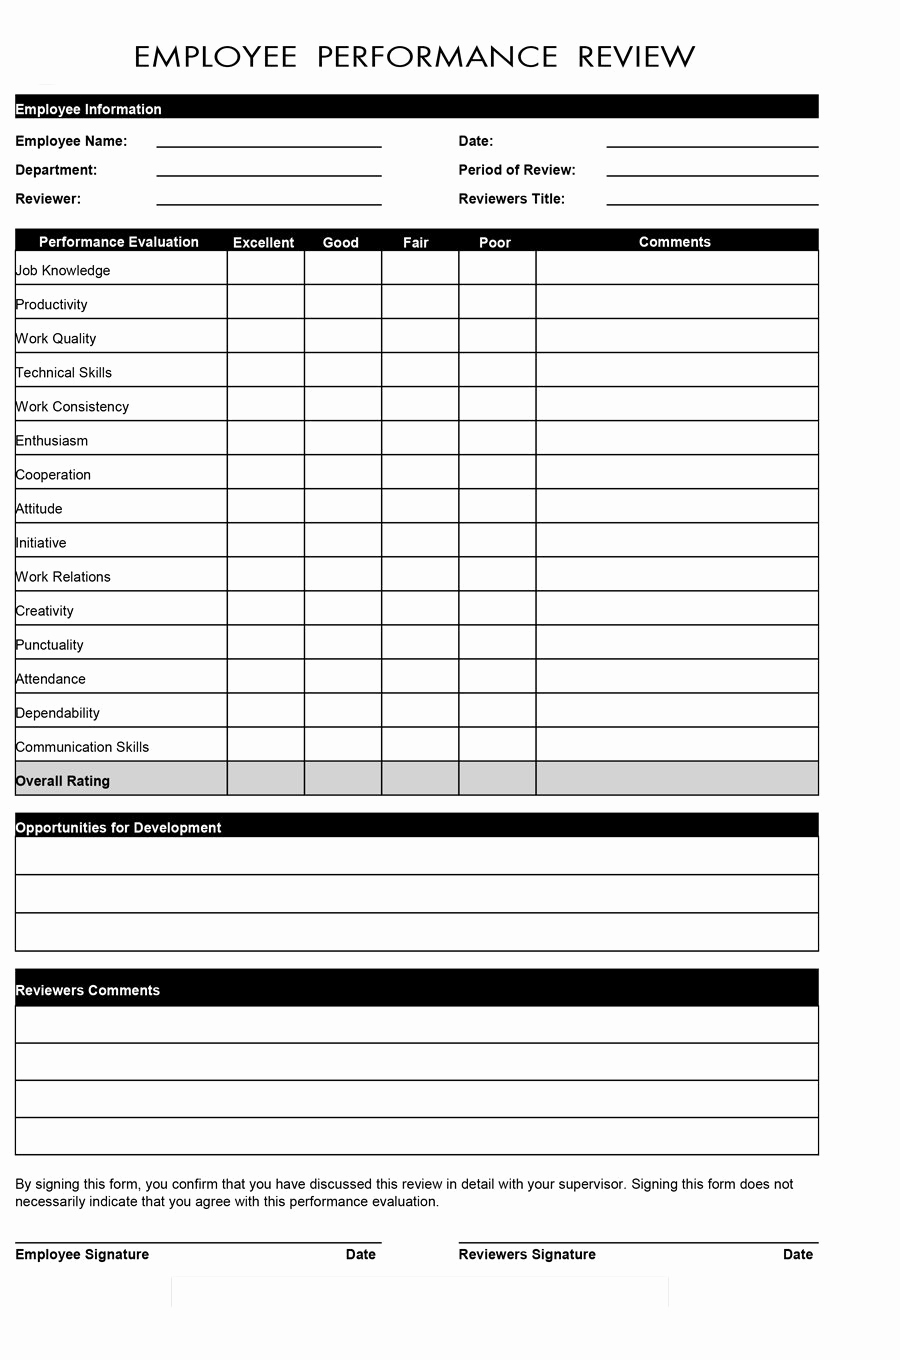 Employee Performance Evaluation forms Lovely 46 Employee Evaluation forms &amp; Performance Review Examples